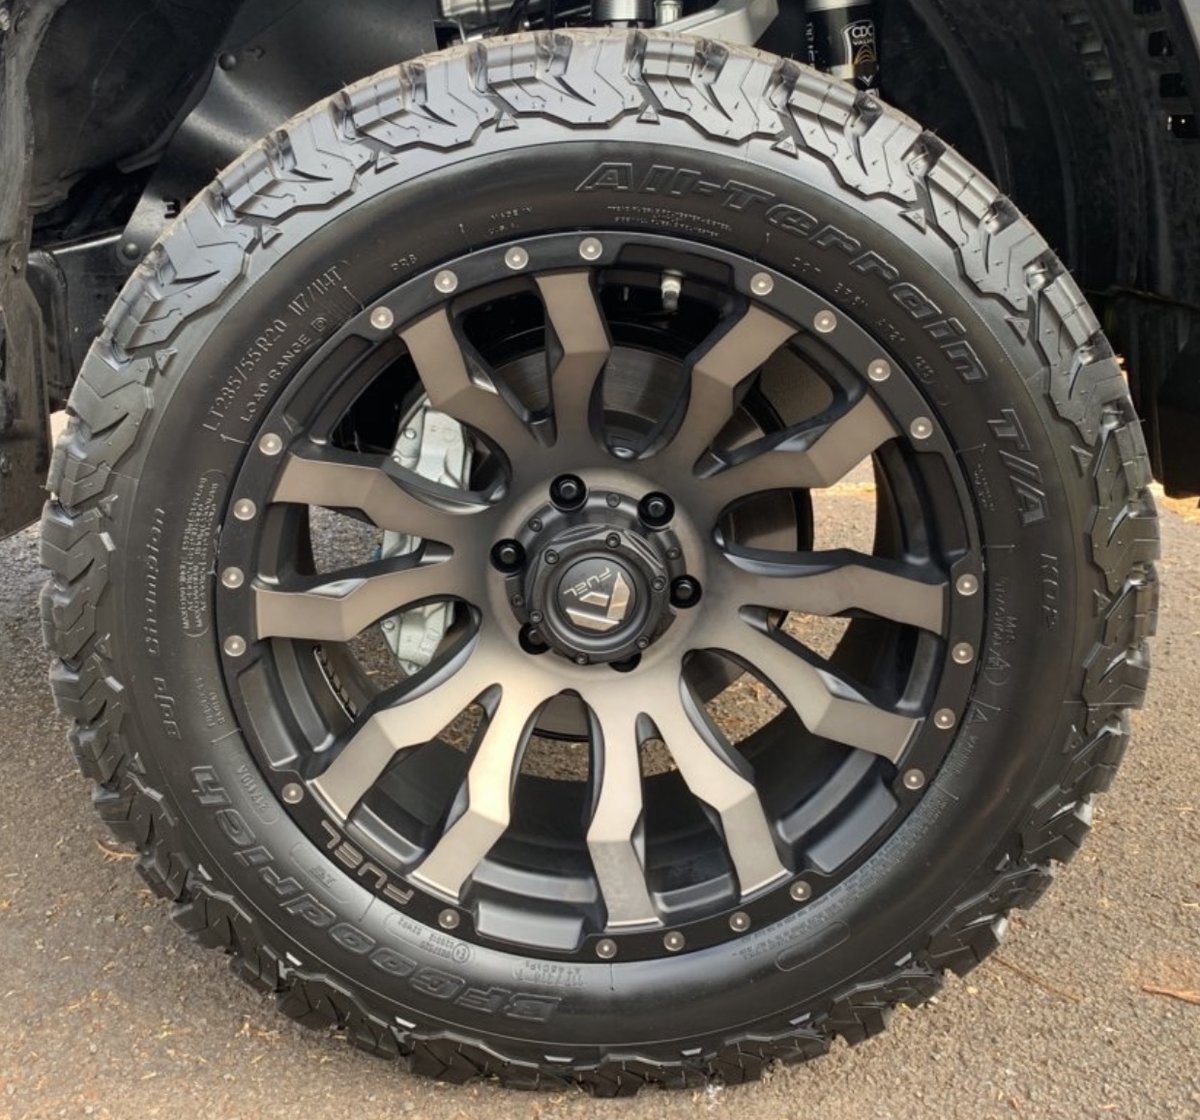 Just ordered new wheels and tires | Jeep Wrangler JK Forum